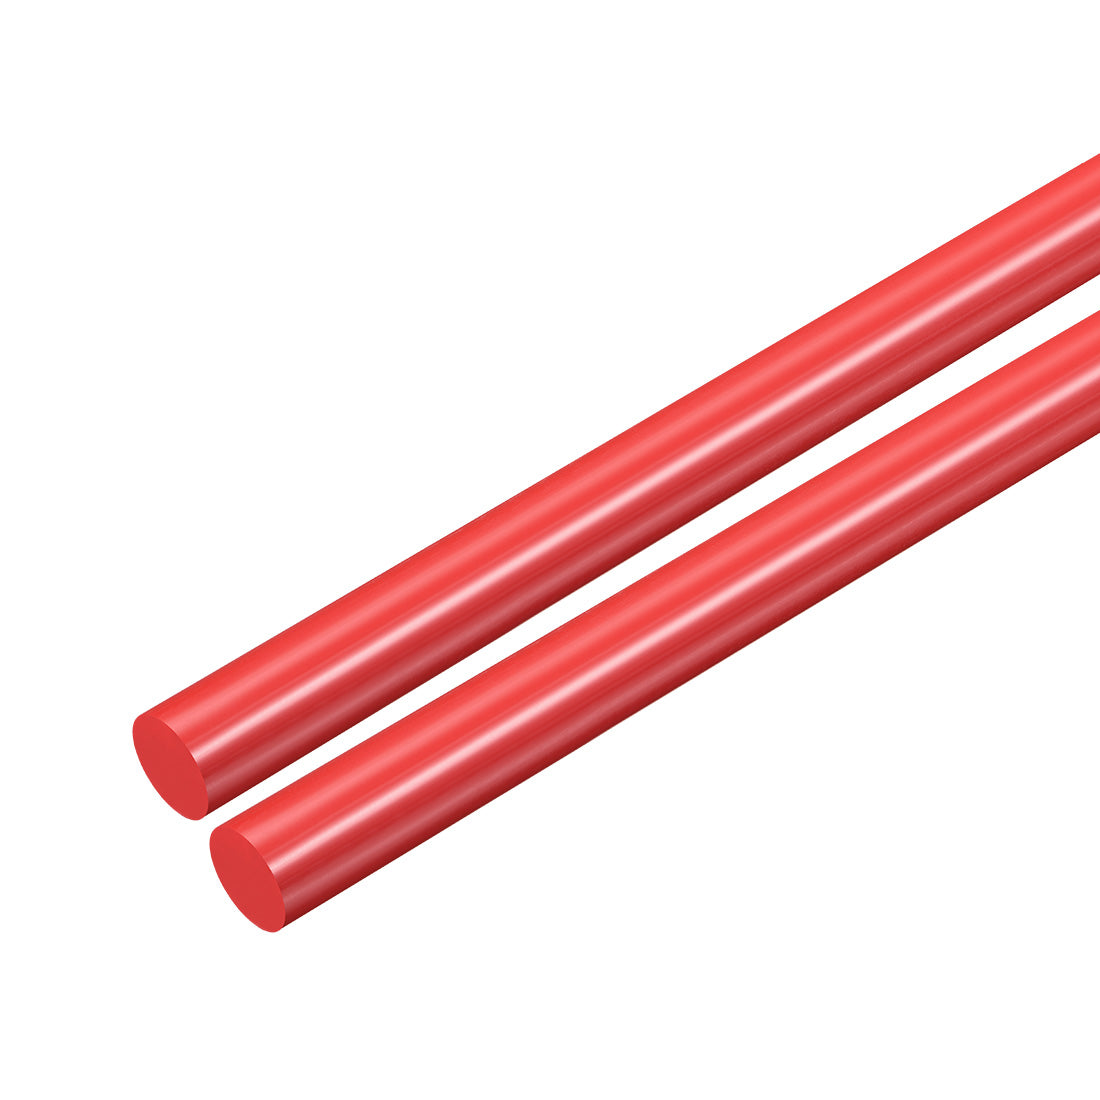 uxcell Uxcell Plastic Round Rod,6mm Dia 50cm Red Engineering Plastic Round Bar 2pcs